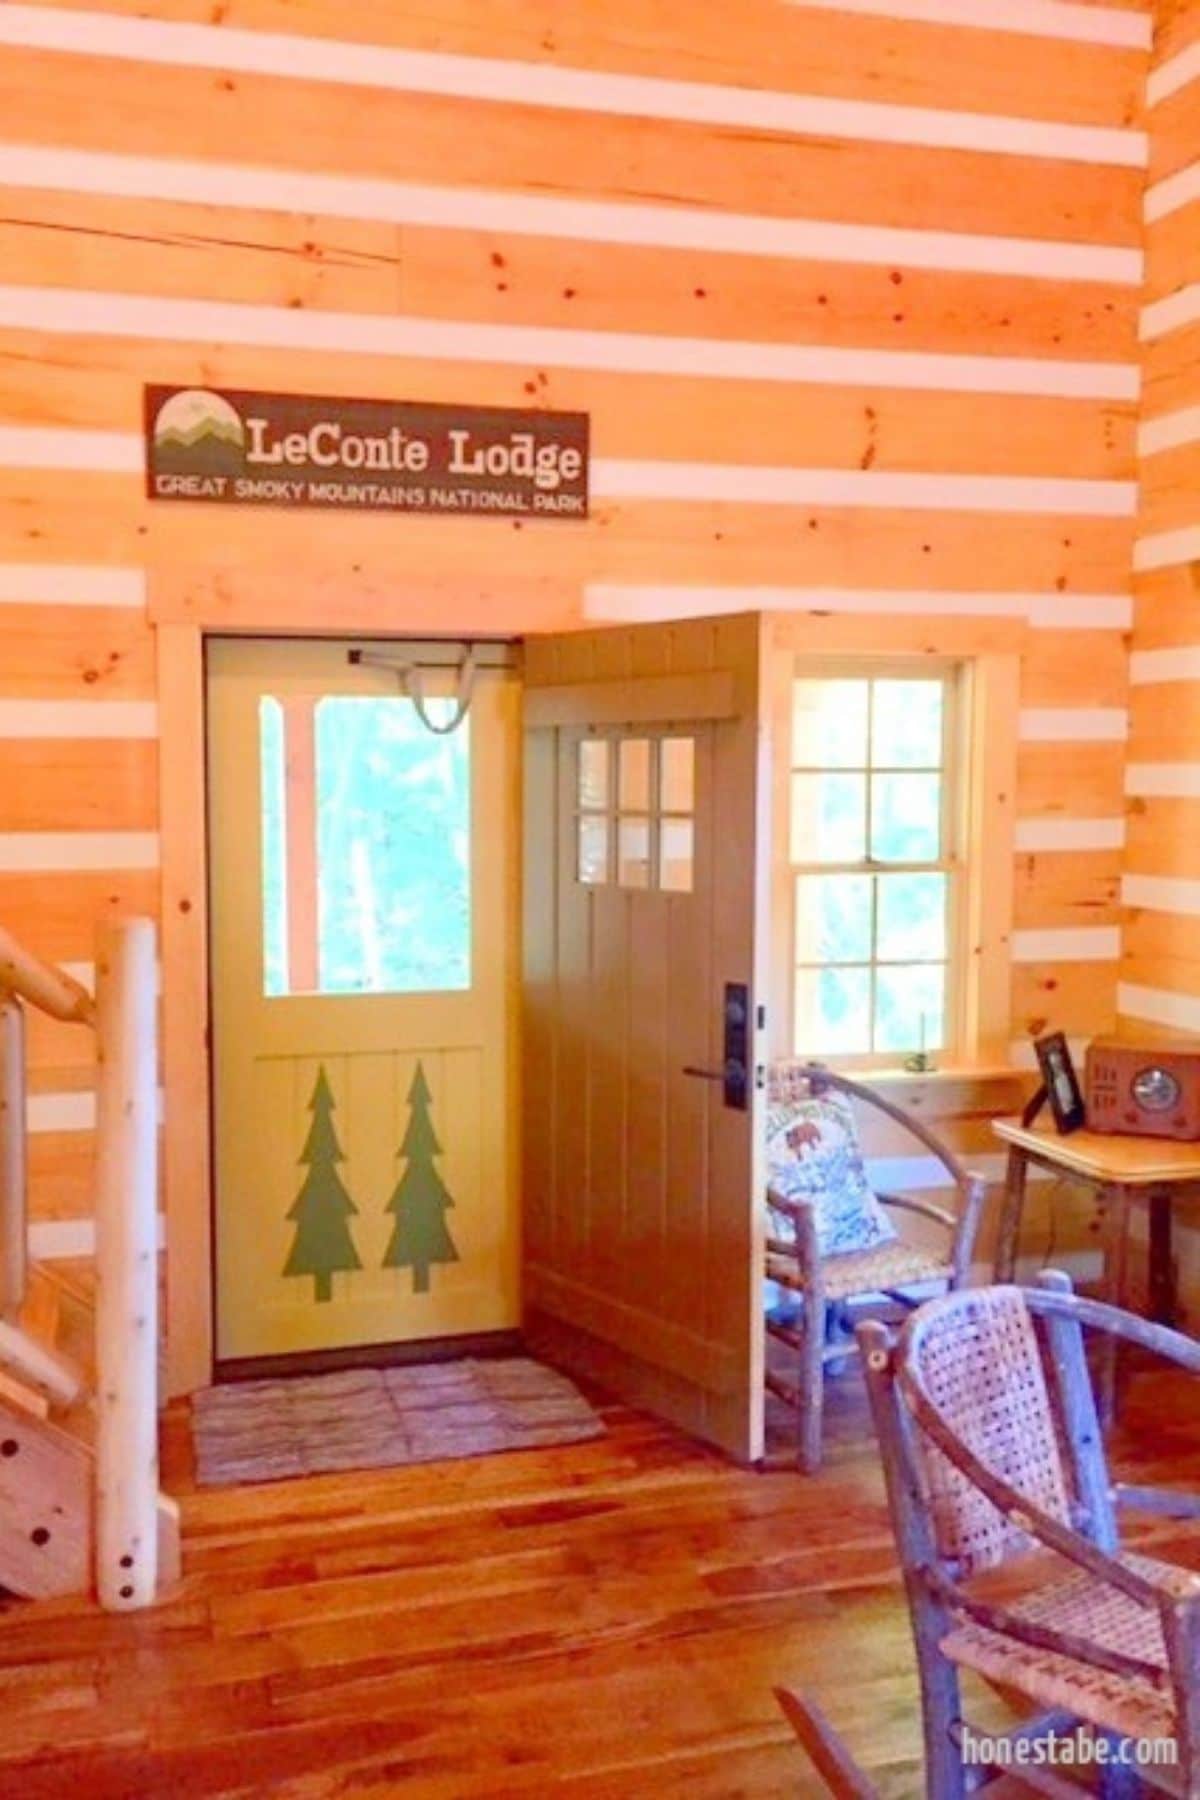 inside front door of log cabin with yellow door that is painted with green trees